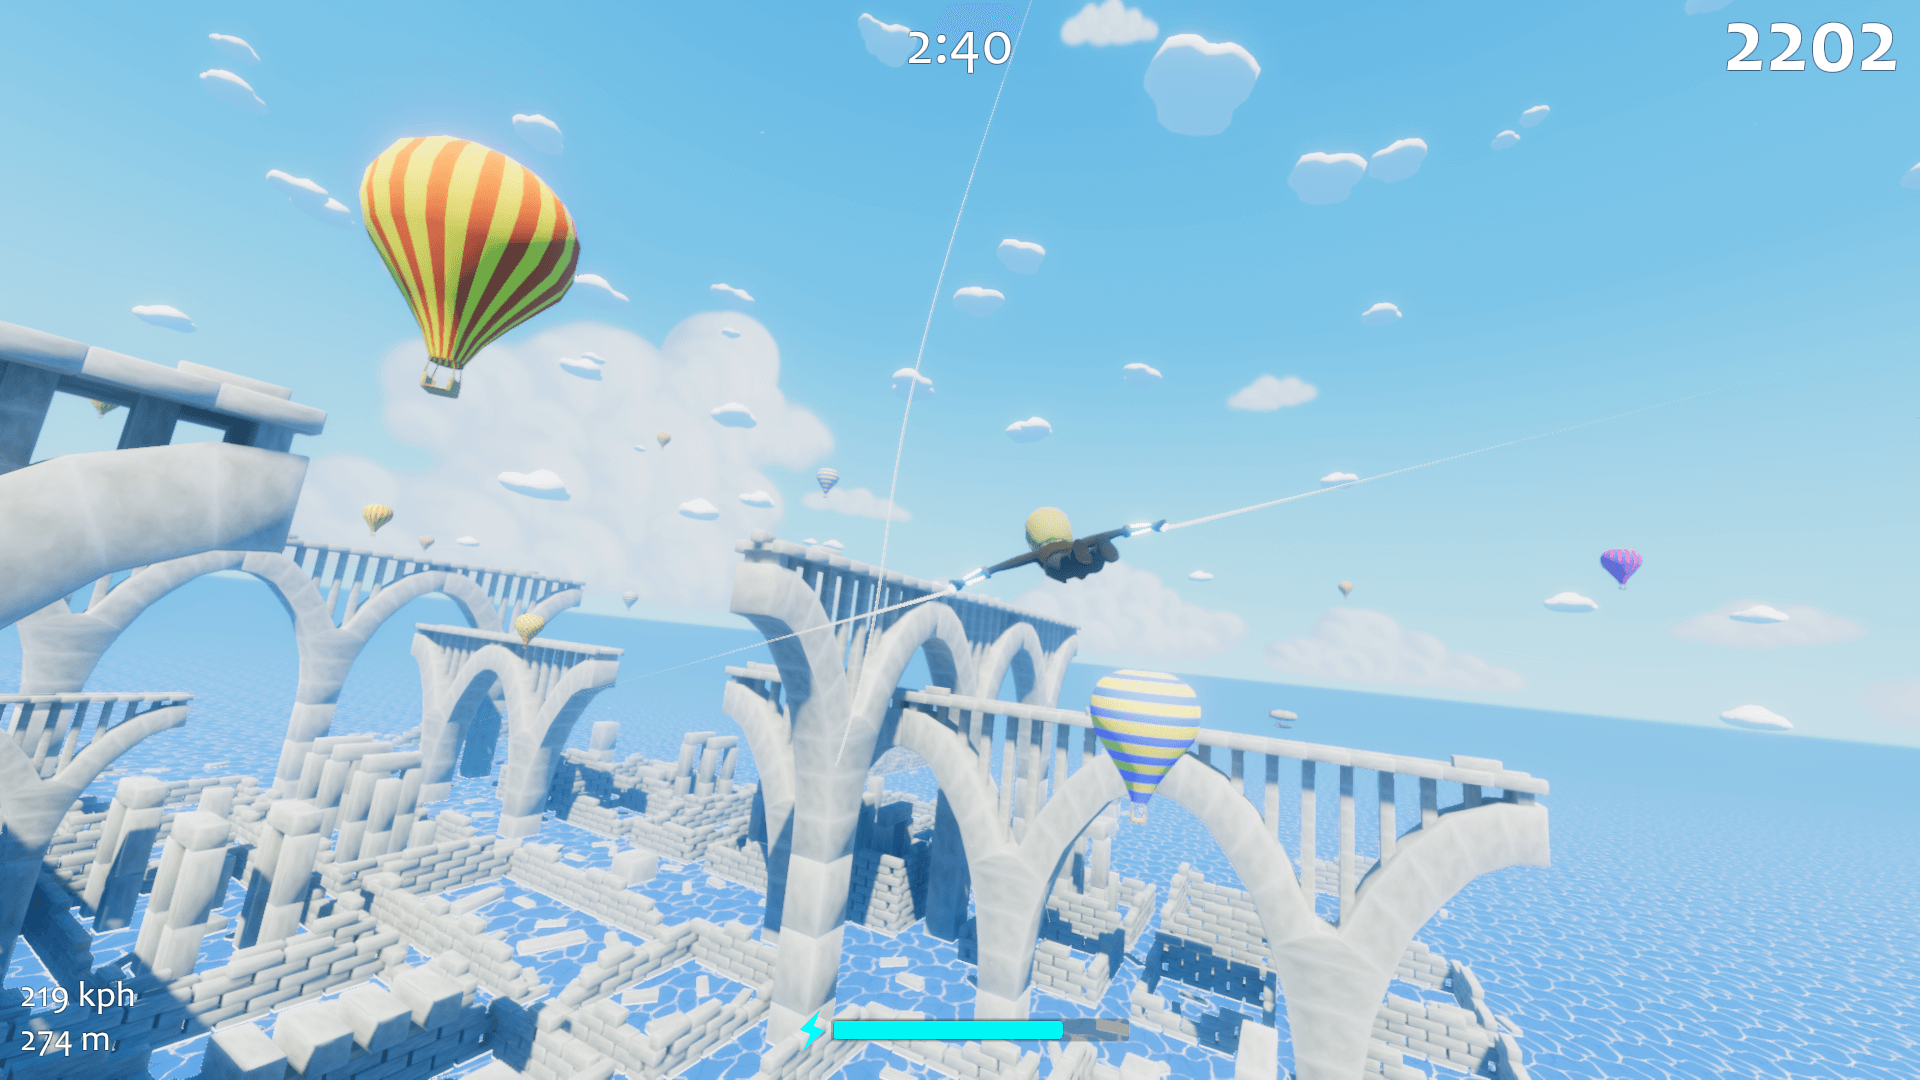 Soaring over ancient stone ruins through a sky filled with hot air balloons